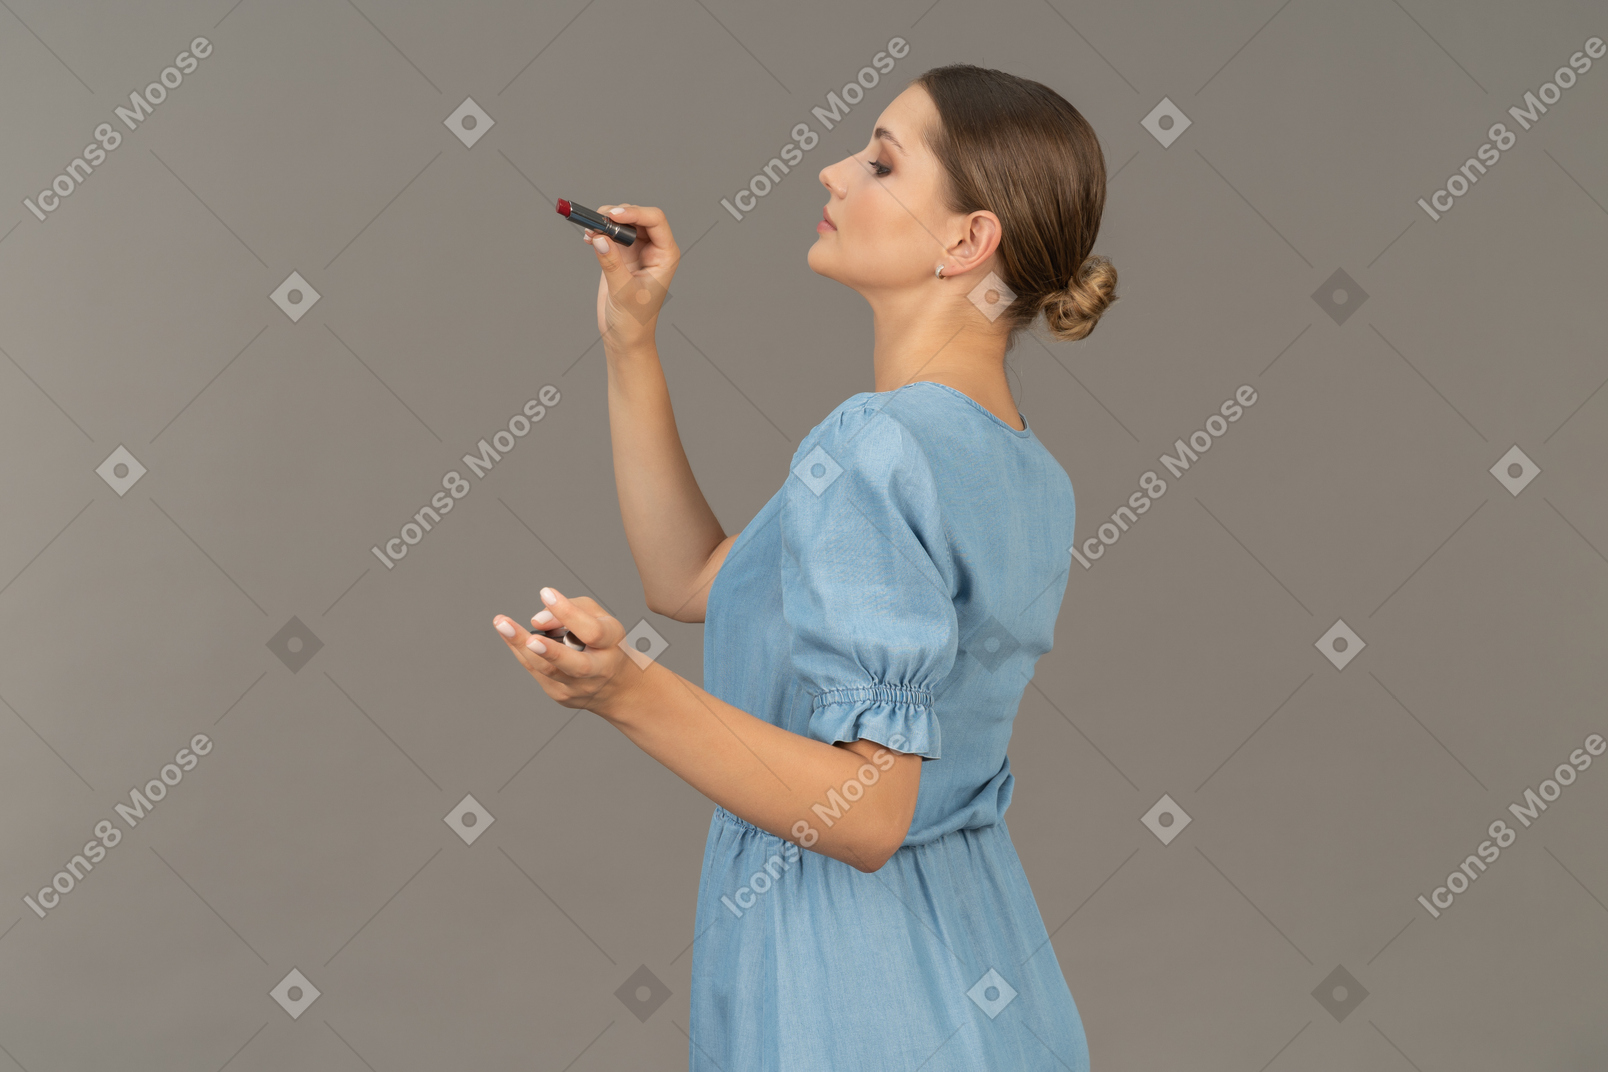 Side view of a young woman in blue dress holding a lipstick